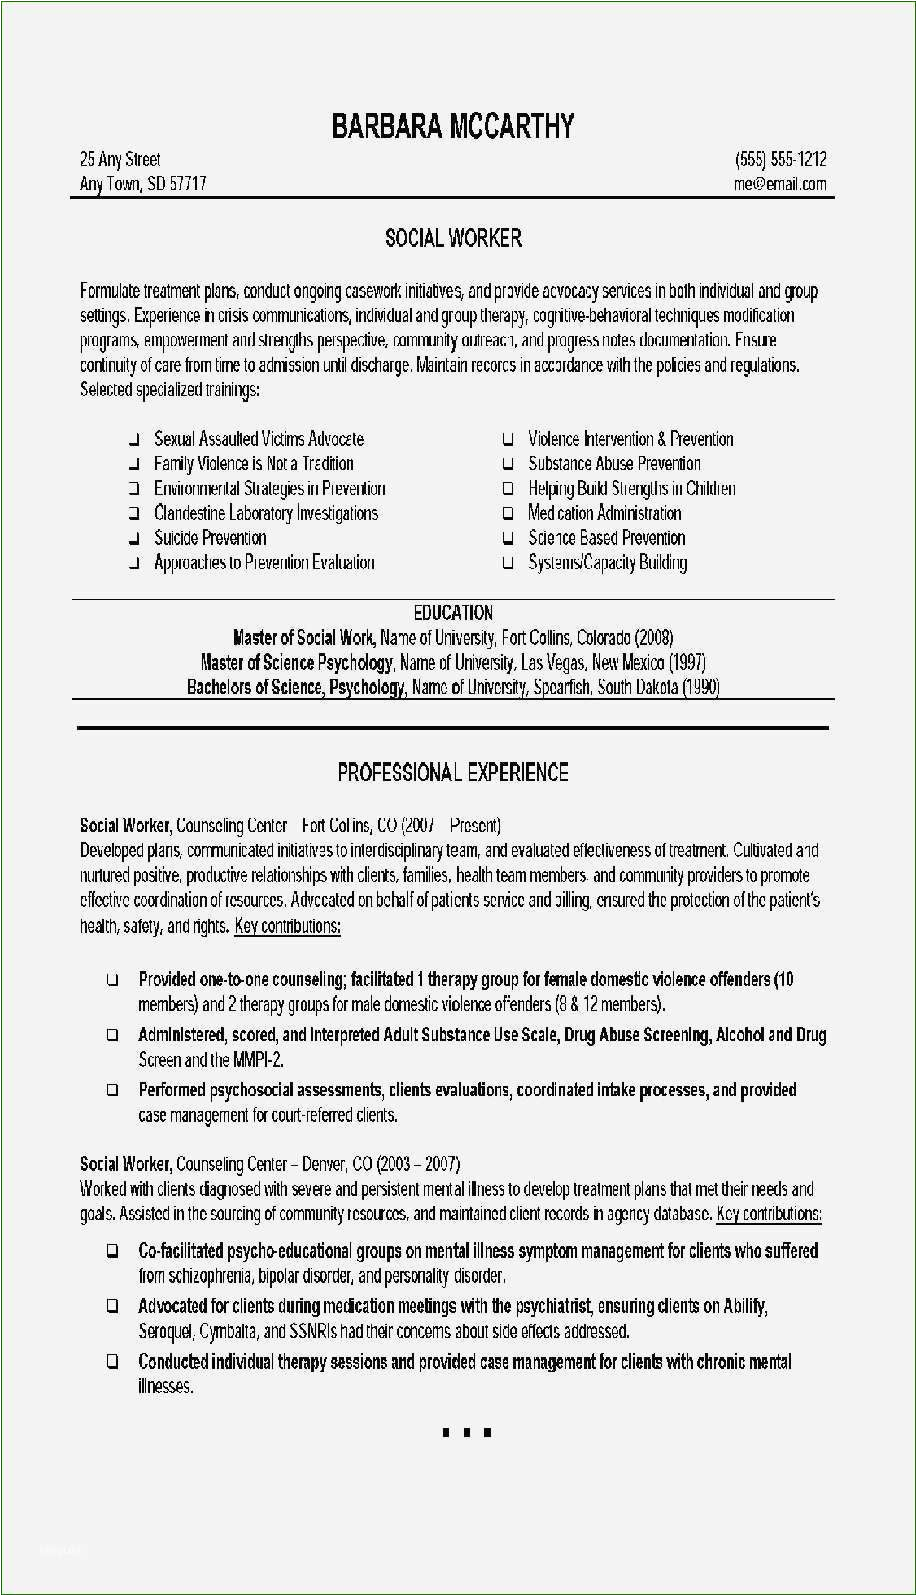 Resume Samples for social Workers Objective social Work Resume Template 18 Consultation 2020